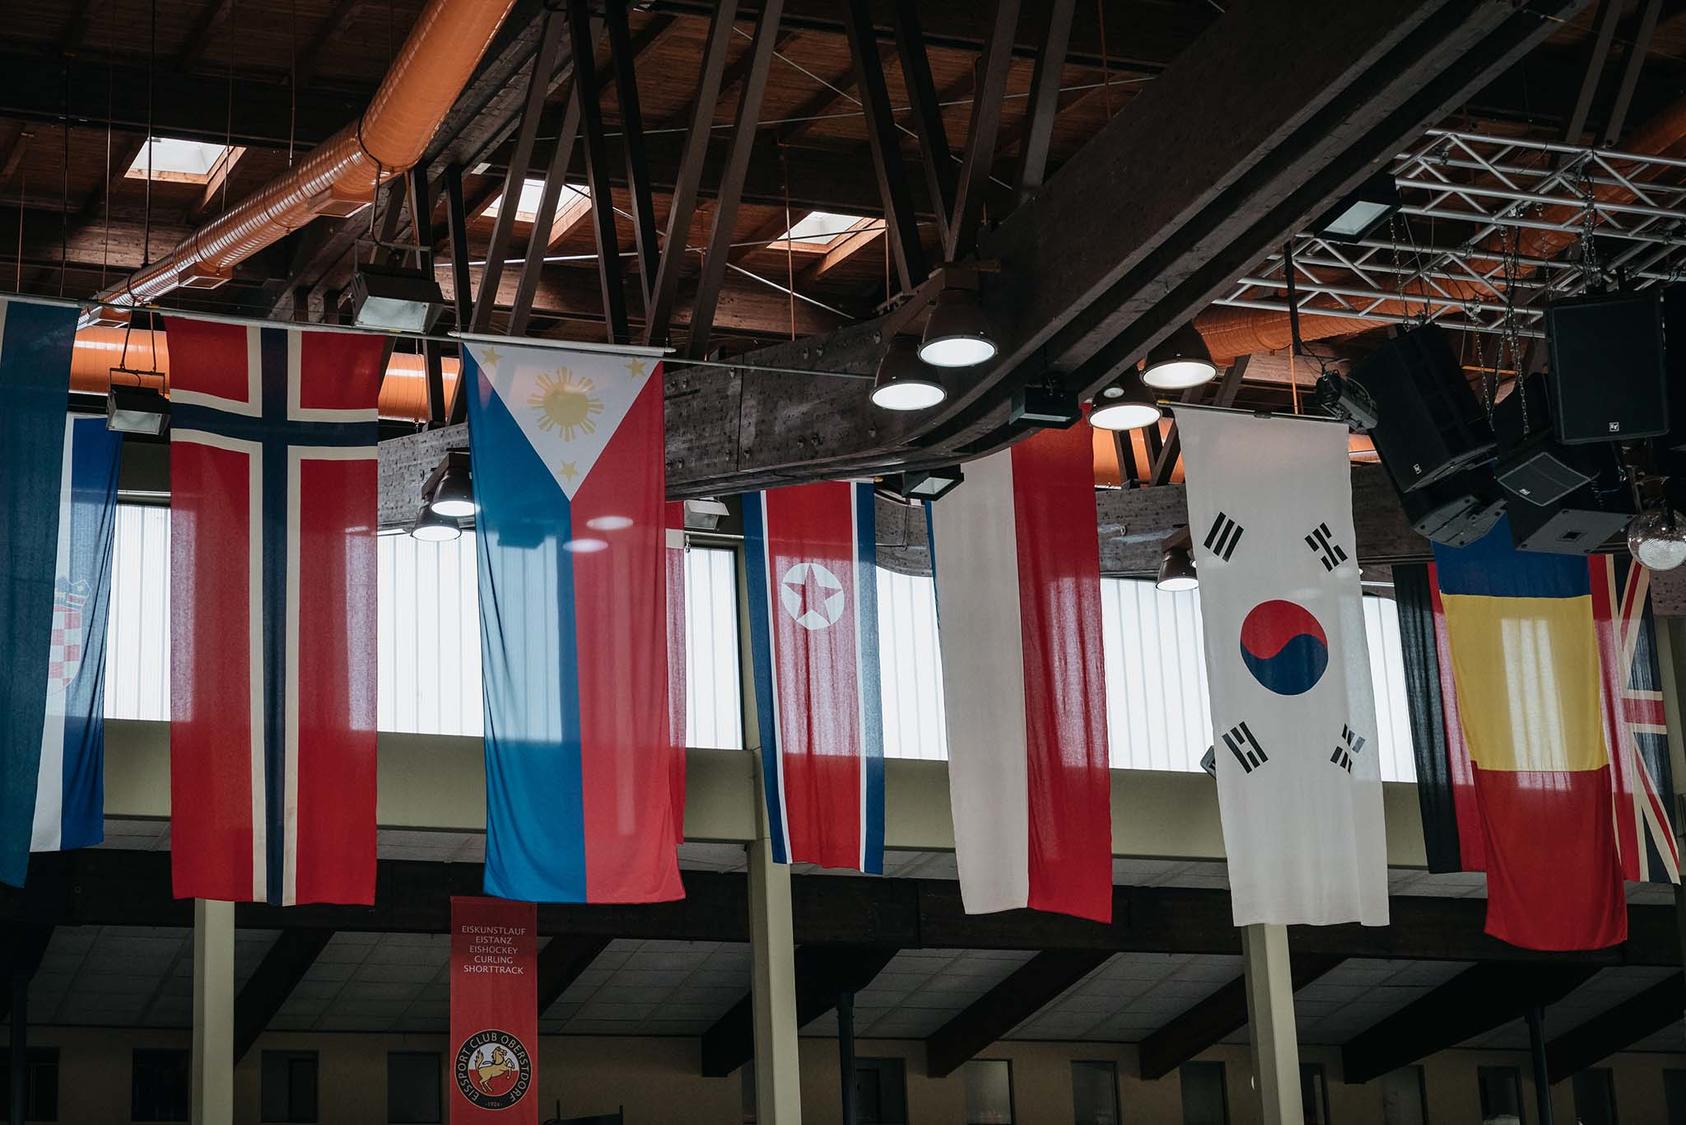 The North Korean flag, third left, hangs with those of other nations at the site of a figure skating competition in Oberstdorf, Germany, Sept. 27, 2017. Korea. (Jun Michael Park/The New York Times)